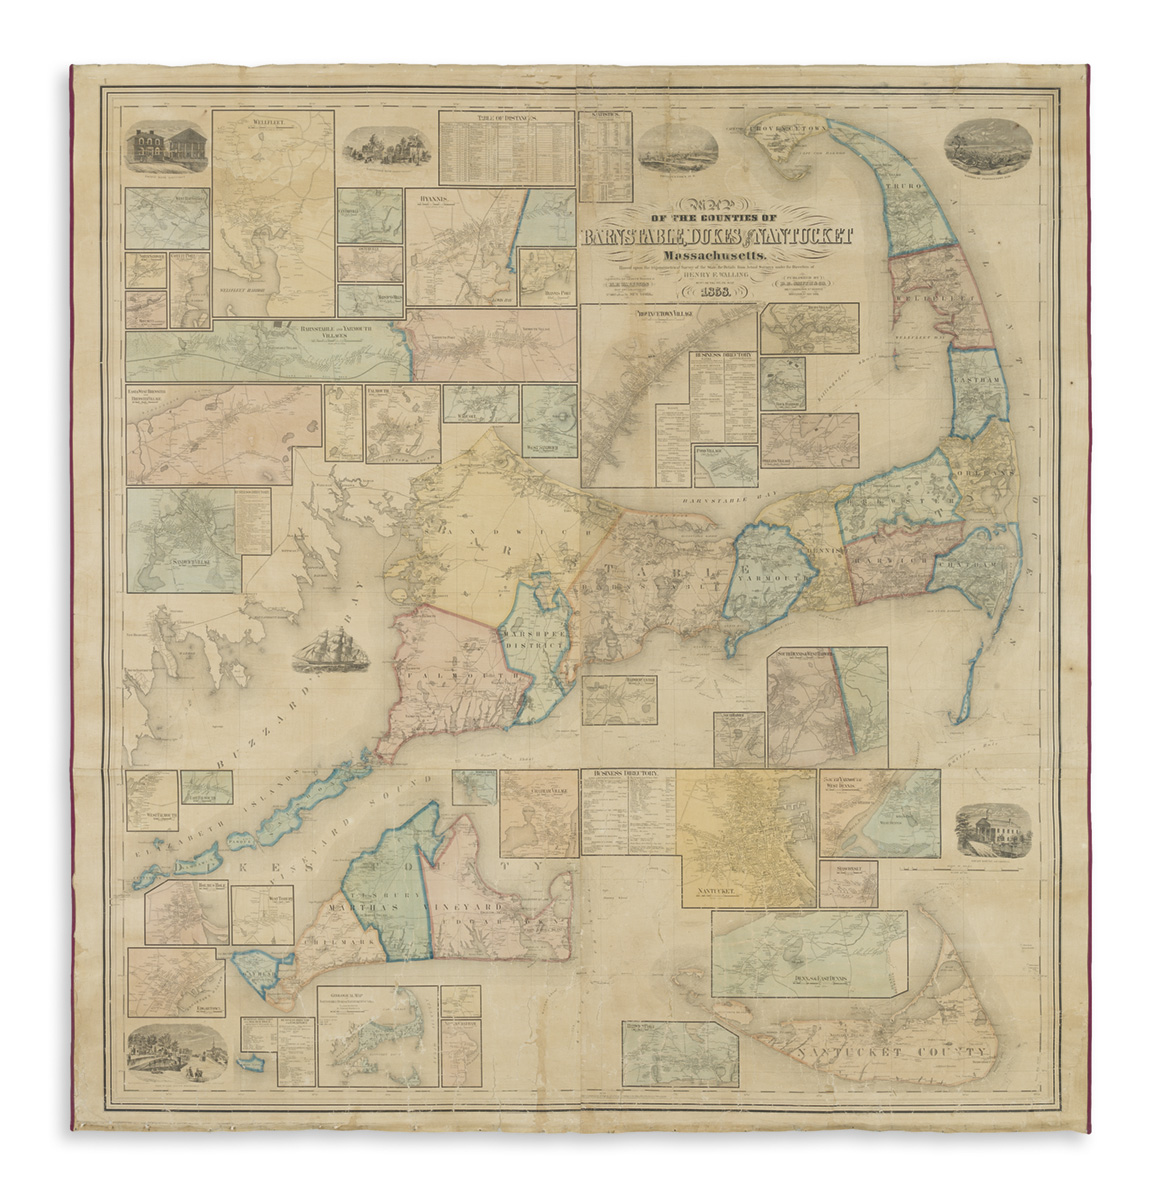 WALLING, HENRY FRANCIS. Map of the Counties of Barnstable, Dukes and Nantucket Massachusetts.